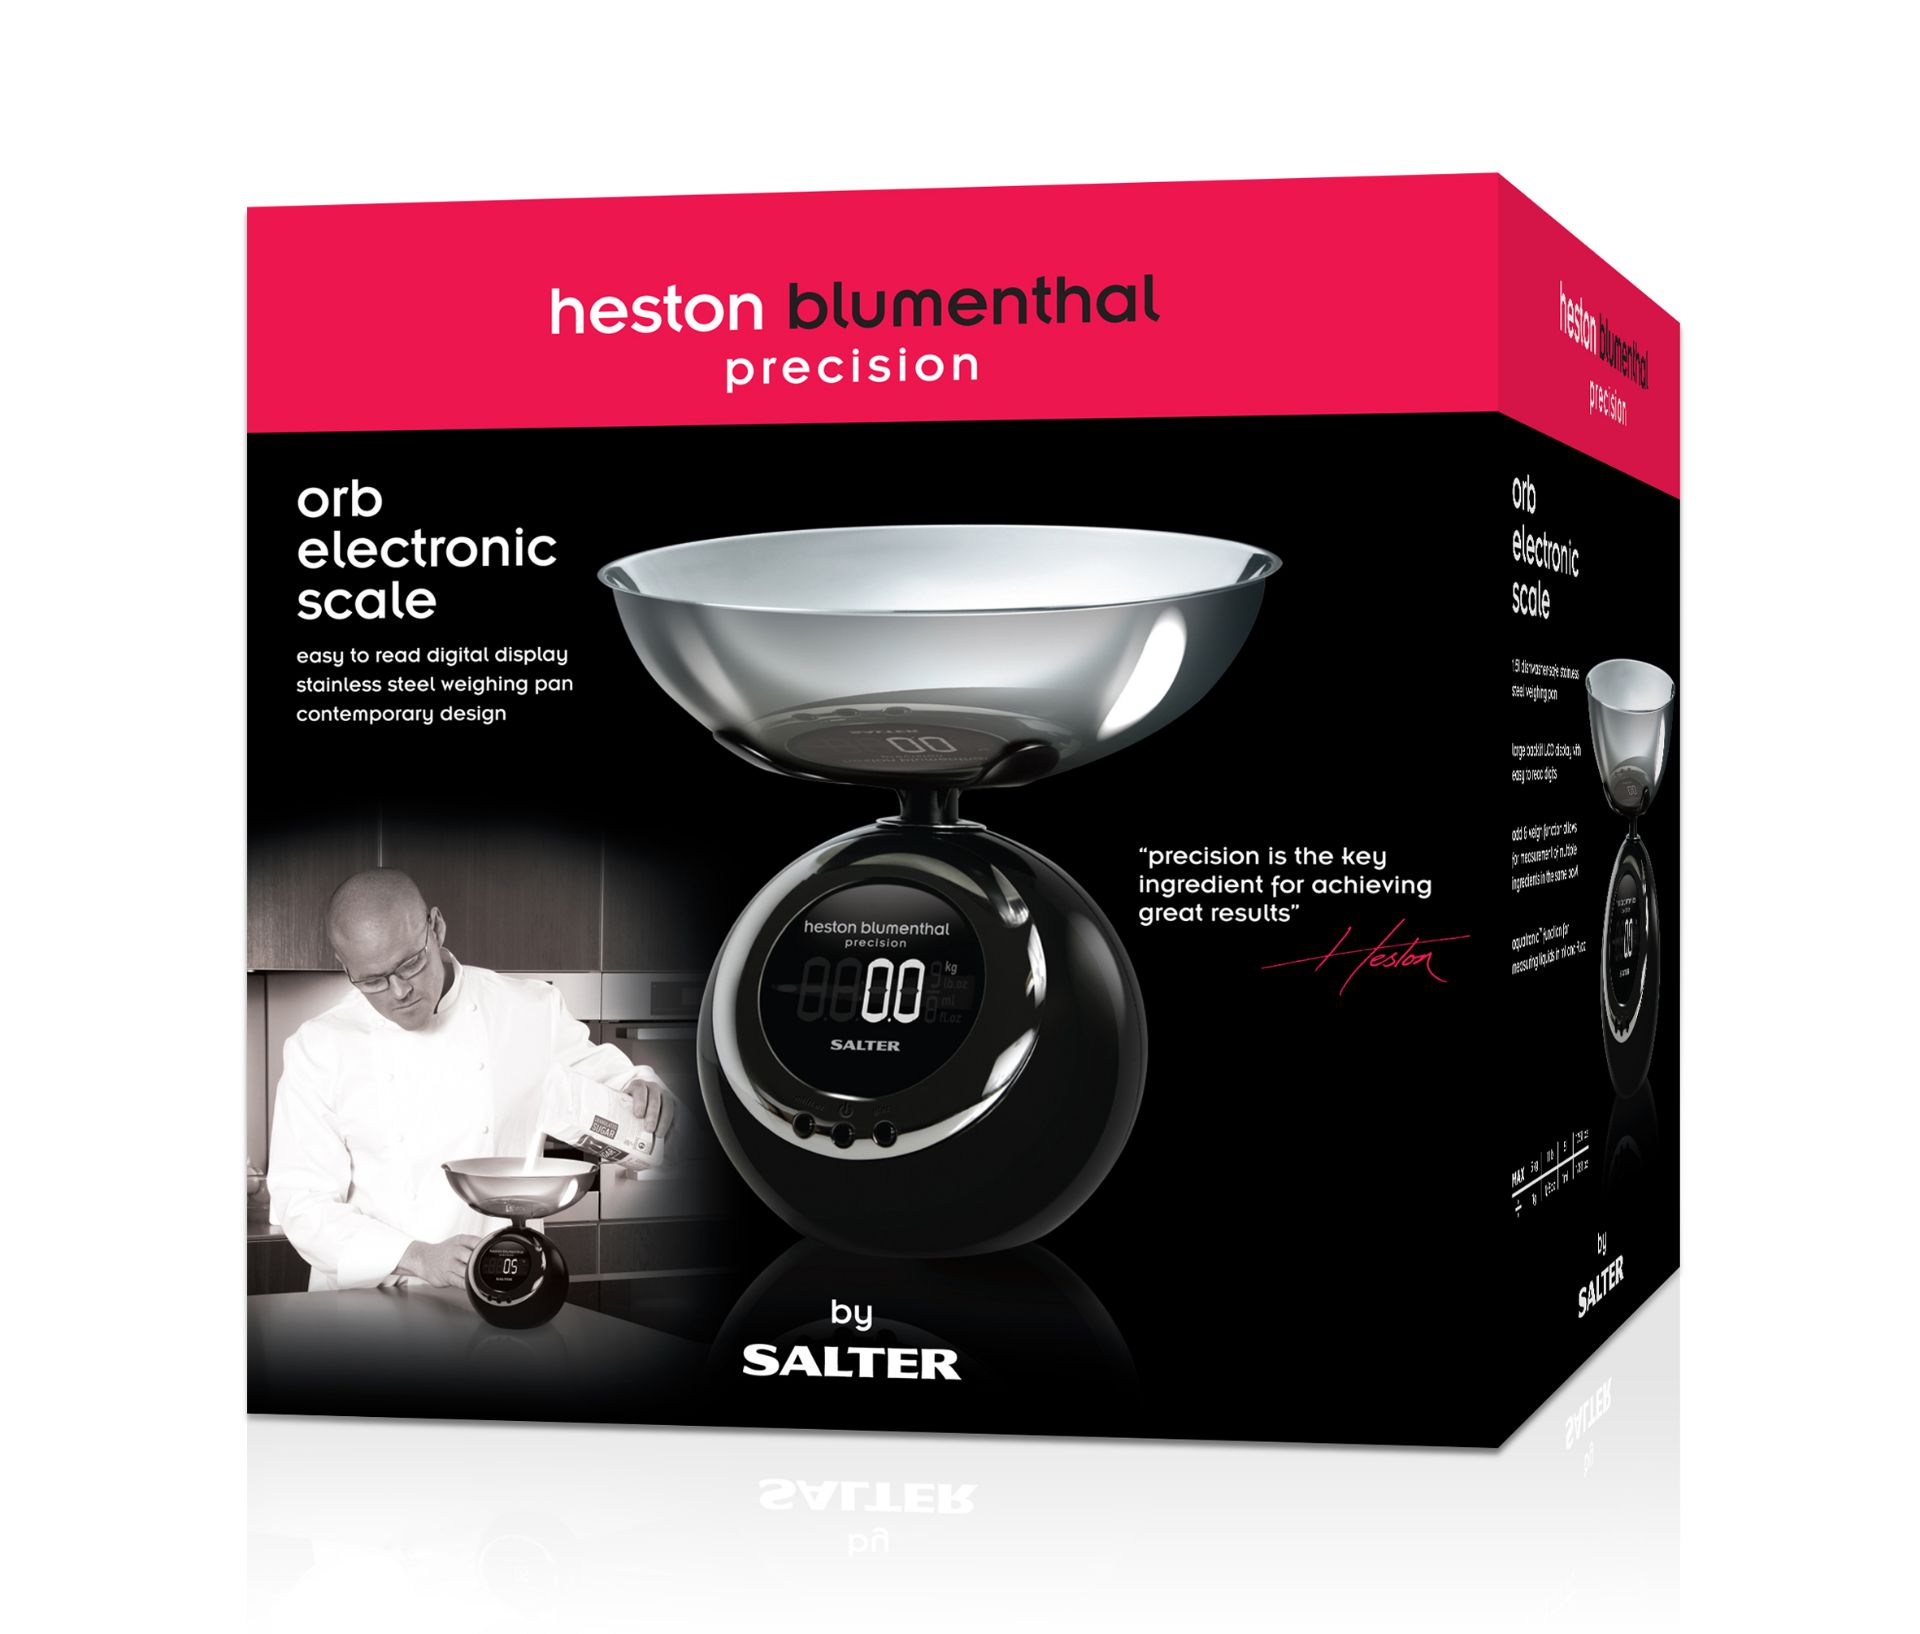 V Brand New Salter Heston Blumenthal Precision Orb Electronic Scale - 1.5 Litre Stainless Steel Bowl